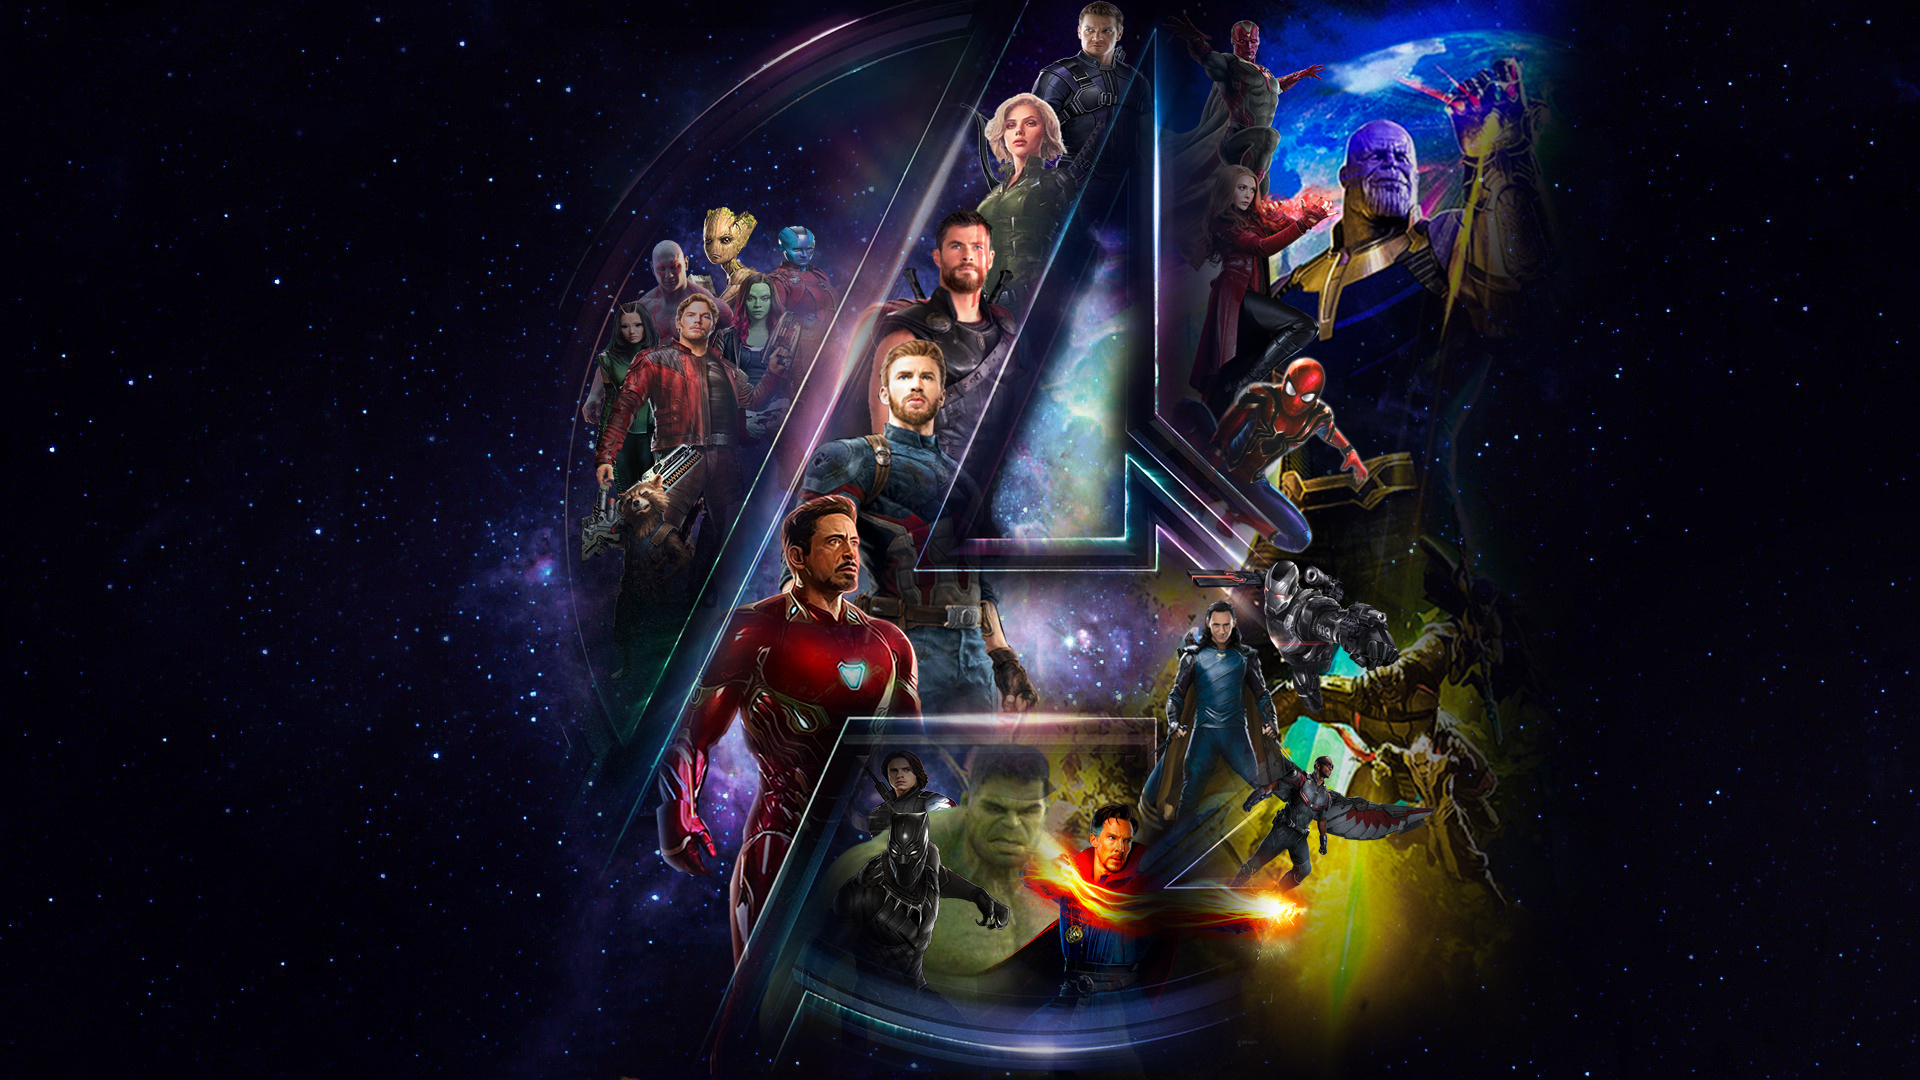 movie, spider man, captain america, avengers, iron man, avengers: infinity war, wanda maximoff, black widow, ant man, black panther (marvel comics), falcon (marvel comics), hulk, thor, vision (marvel comics), war machine, winter soldier, the avengers wallpaper for mobile